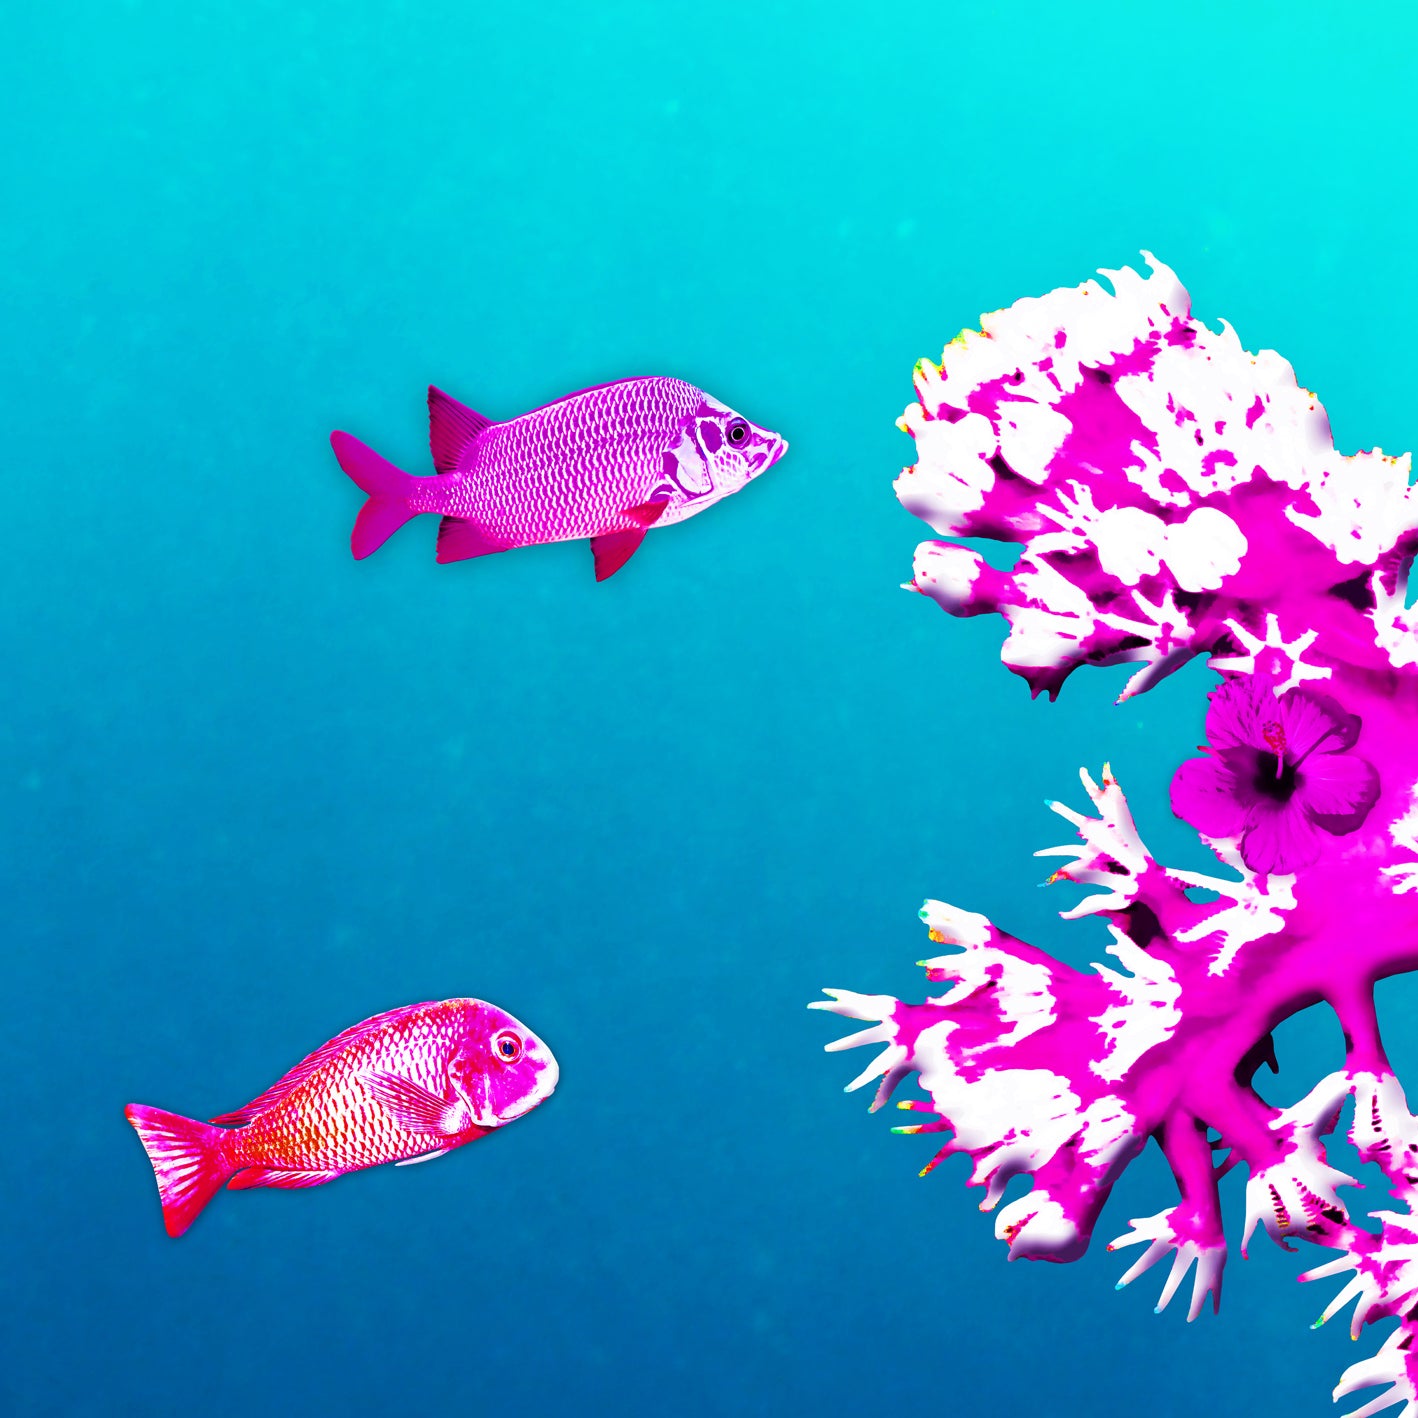 Purple Coral Reef | 176x99 cm | edition of 7